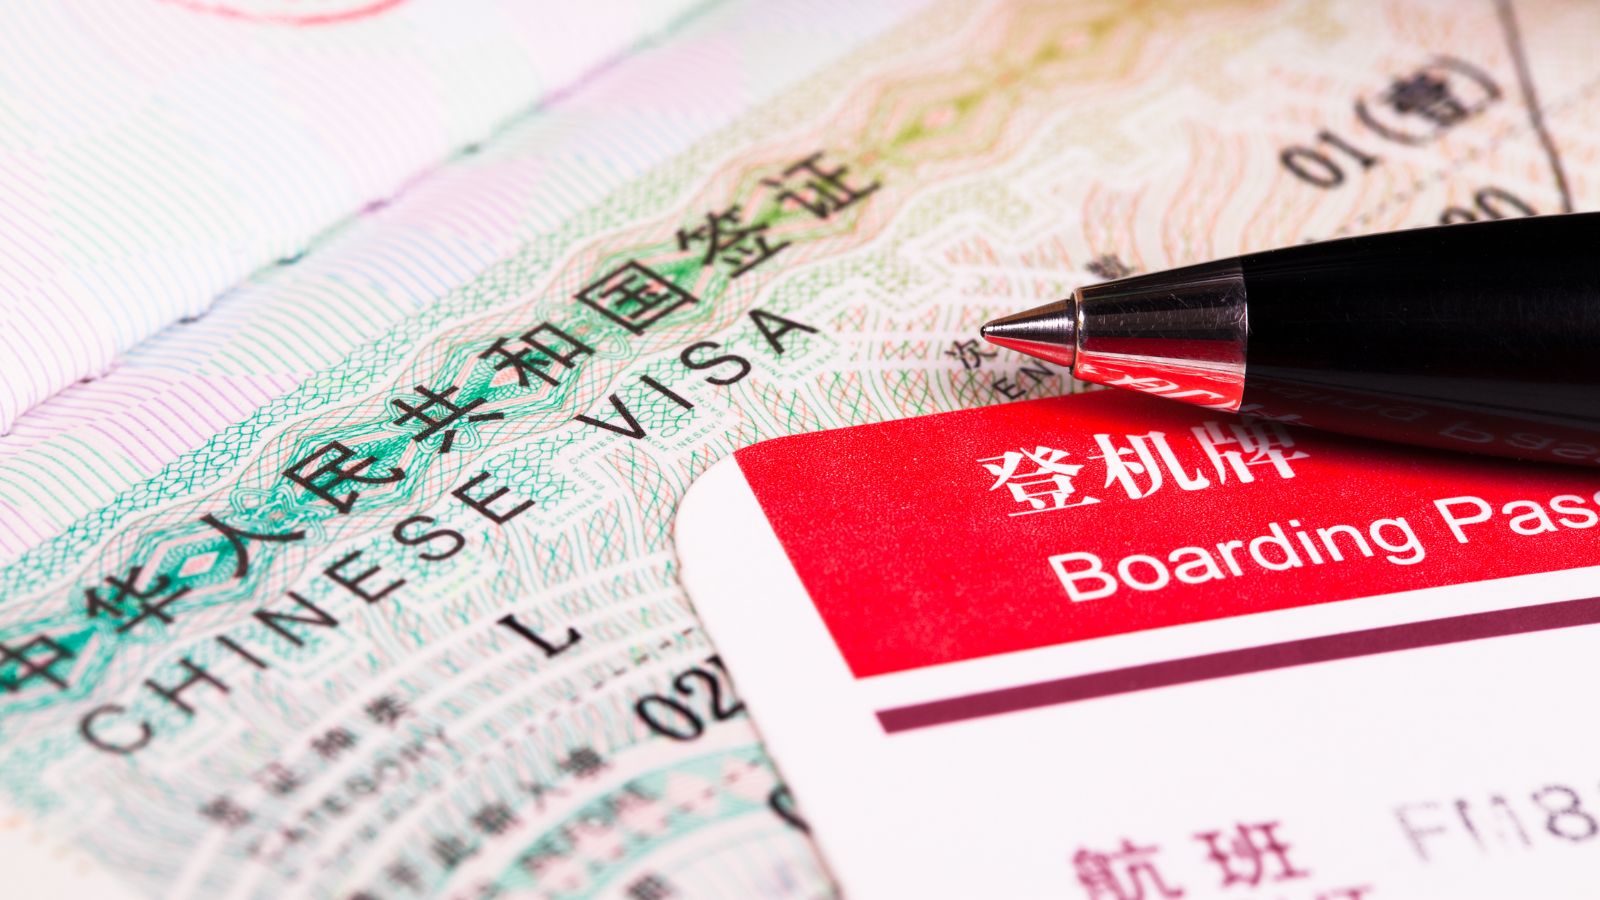 <p>First and foremost, foreign visitors to China need to be aware of the country’s visa regulations. Before you embark on your journey, you need to apply for the required L-visa, and information about this can be found on their embassy or visa application <a href="https://bio.visaforchina.cn/LON3_EN/qianzhengyewu">services website</a>. Make sure you have the right documents and apply early, as it could take a few weeks for it to be processed.</p>